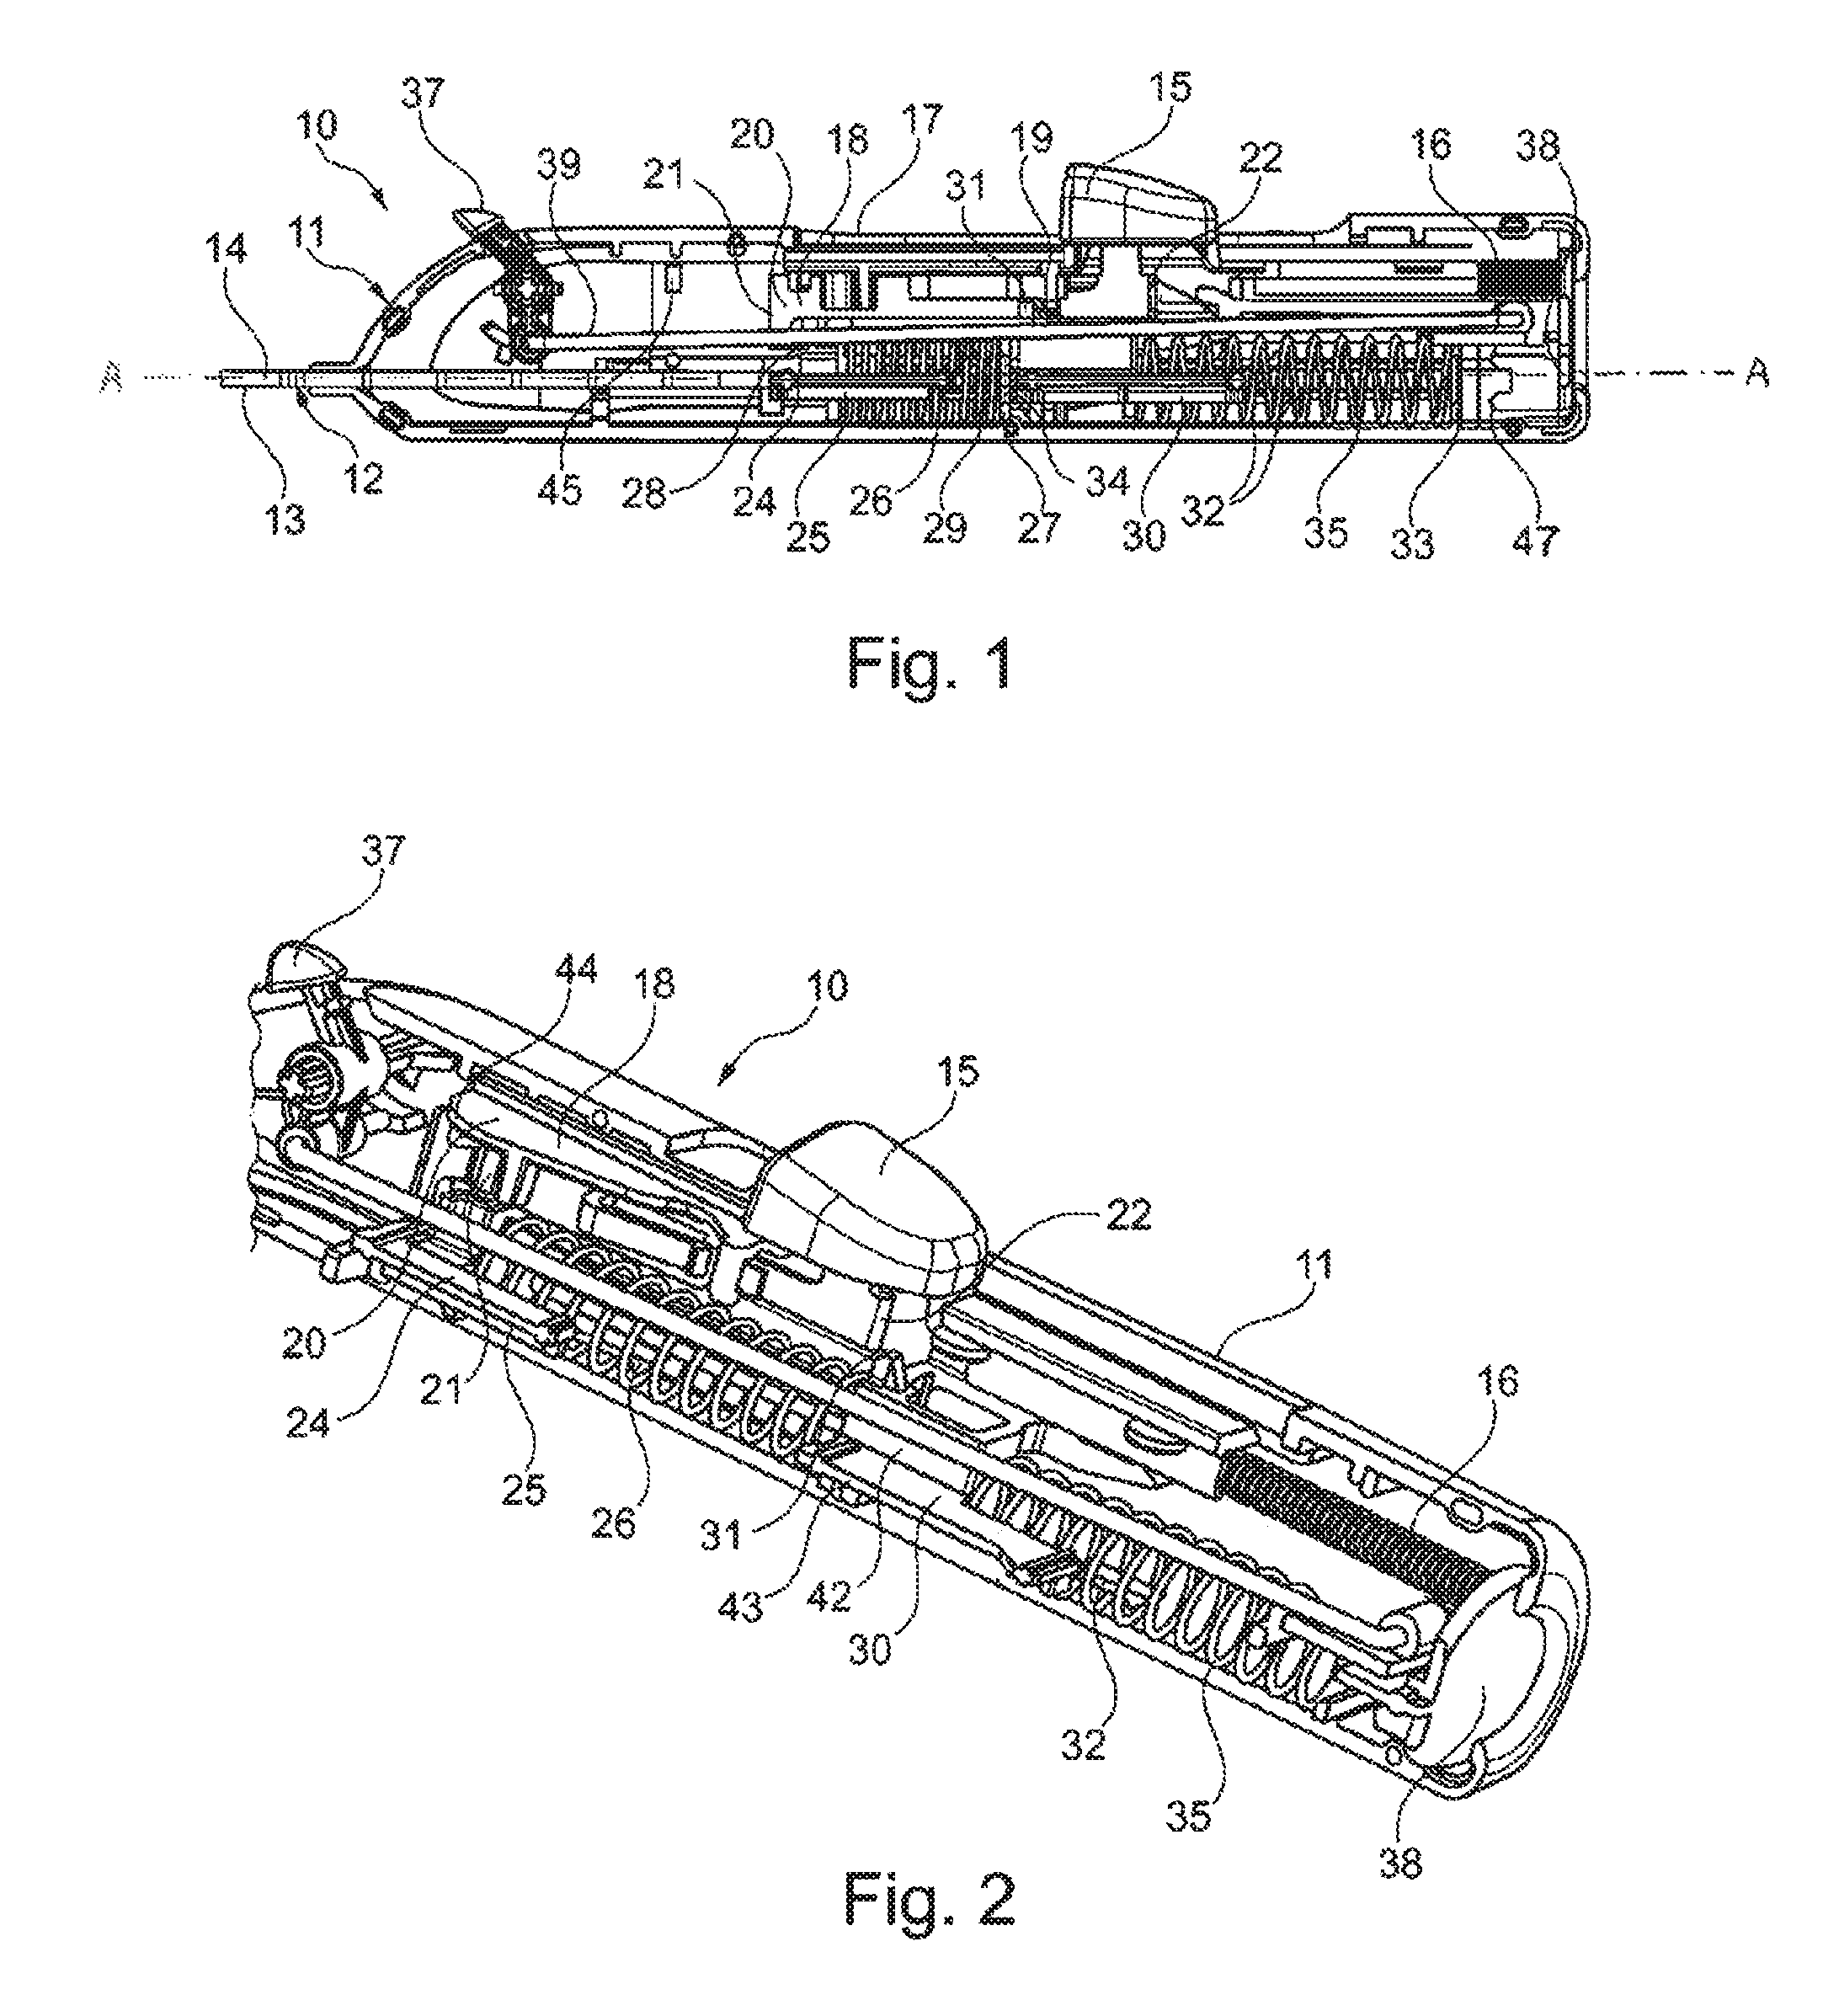 Device for taking at least one sample of tissue